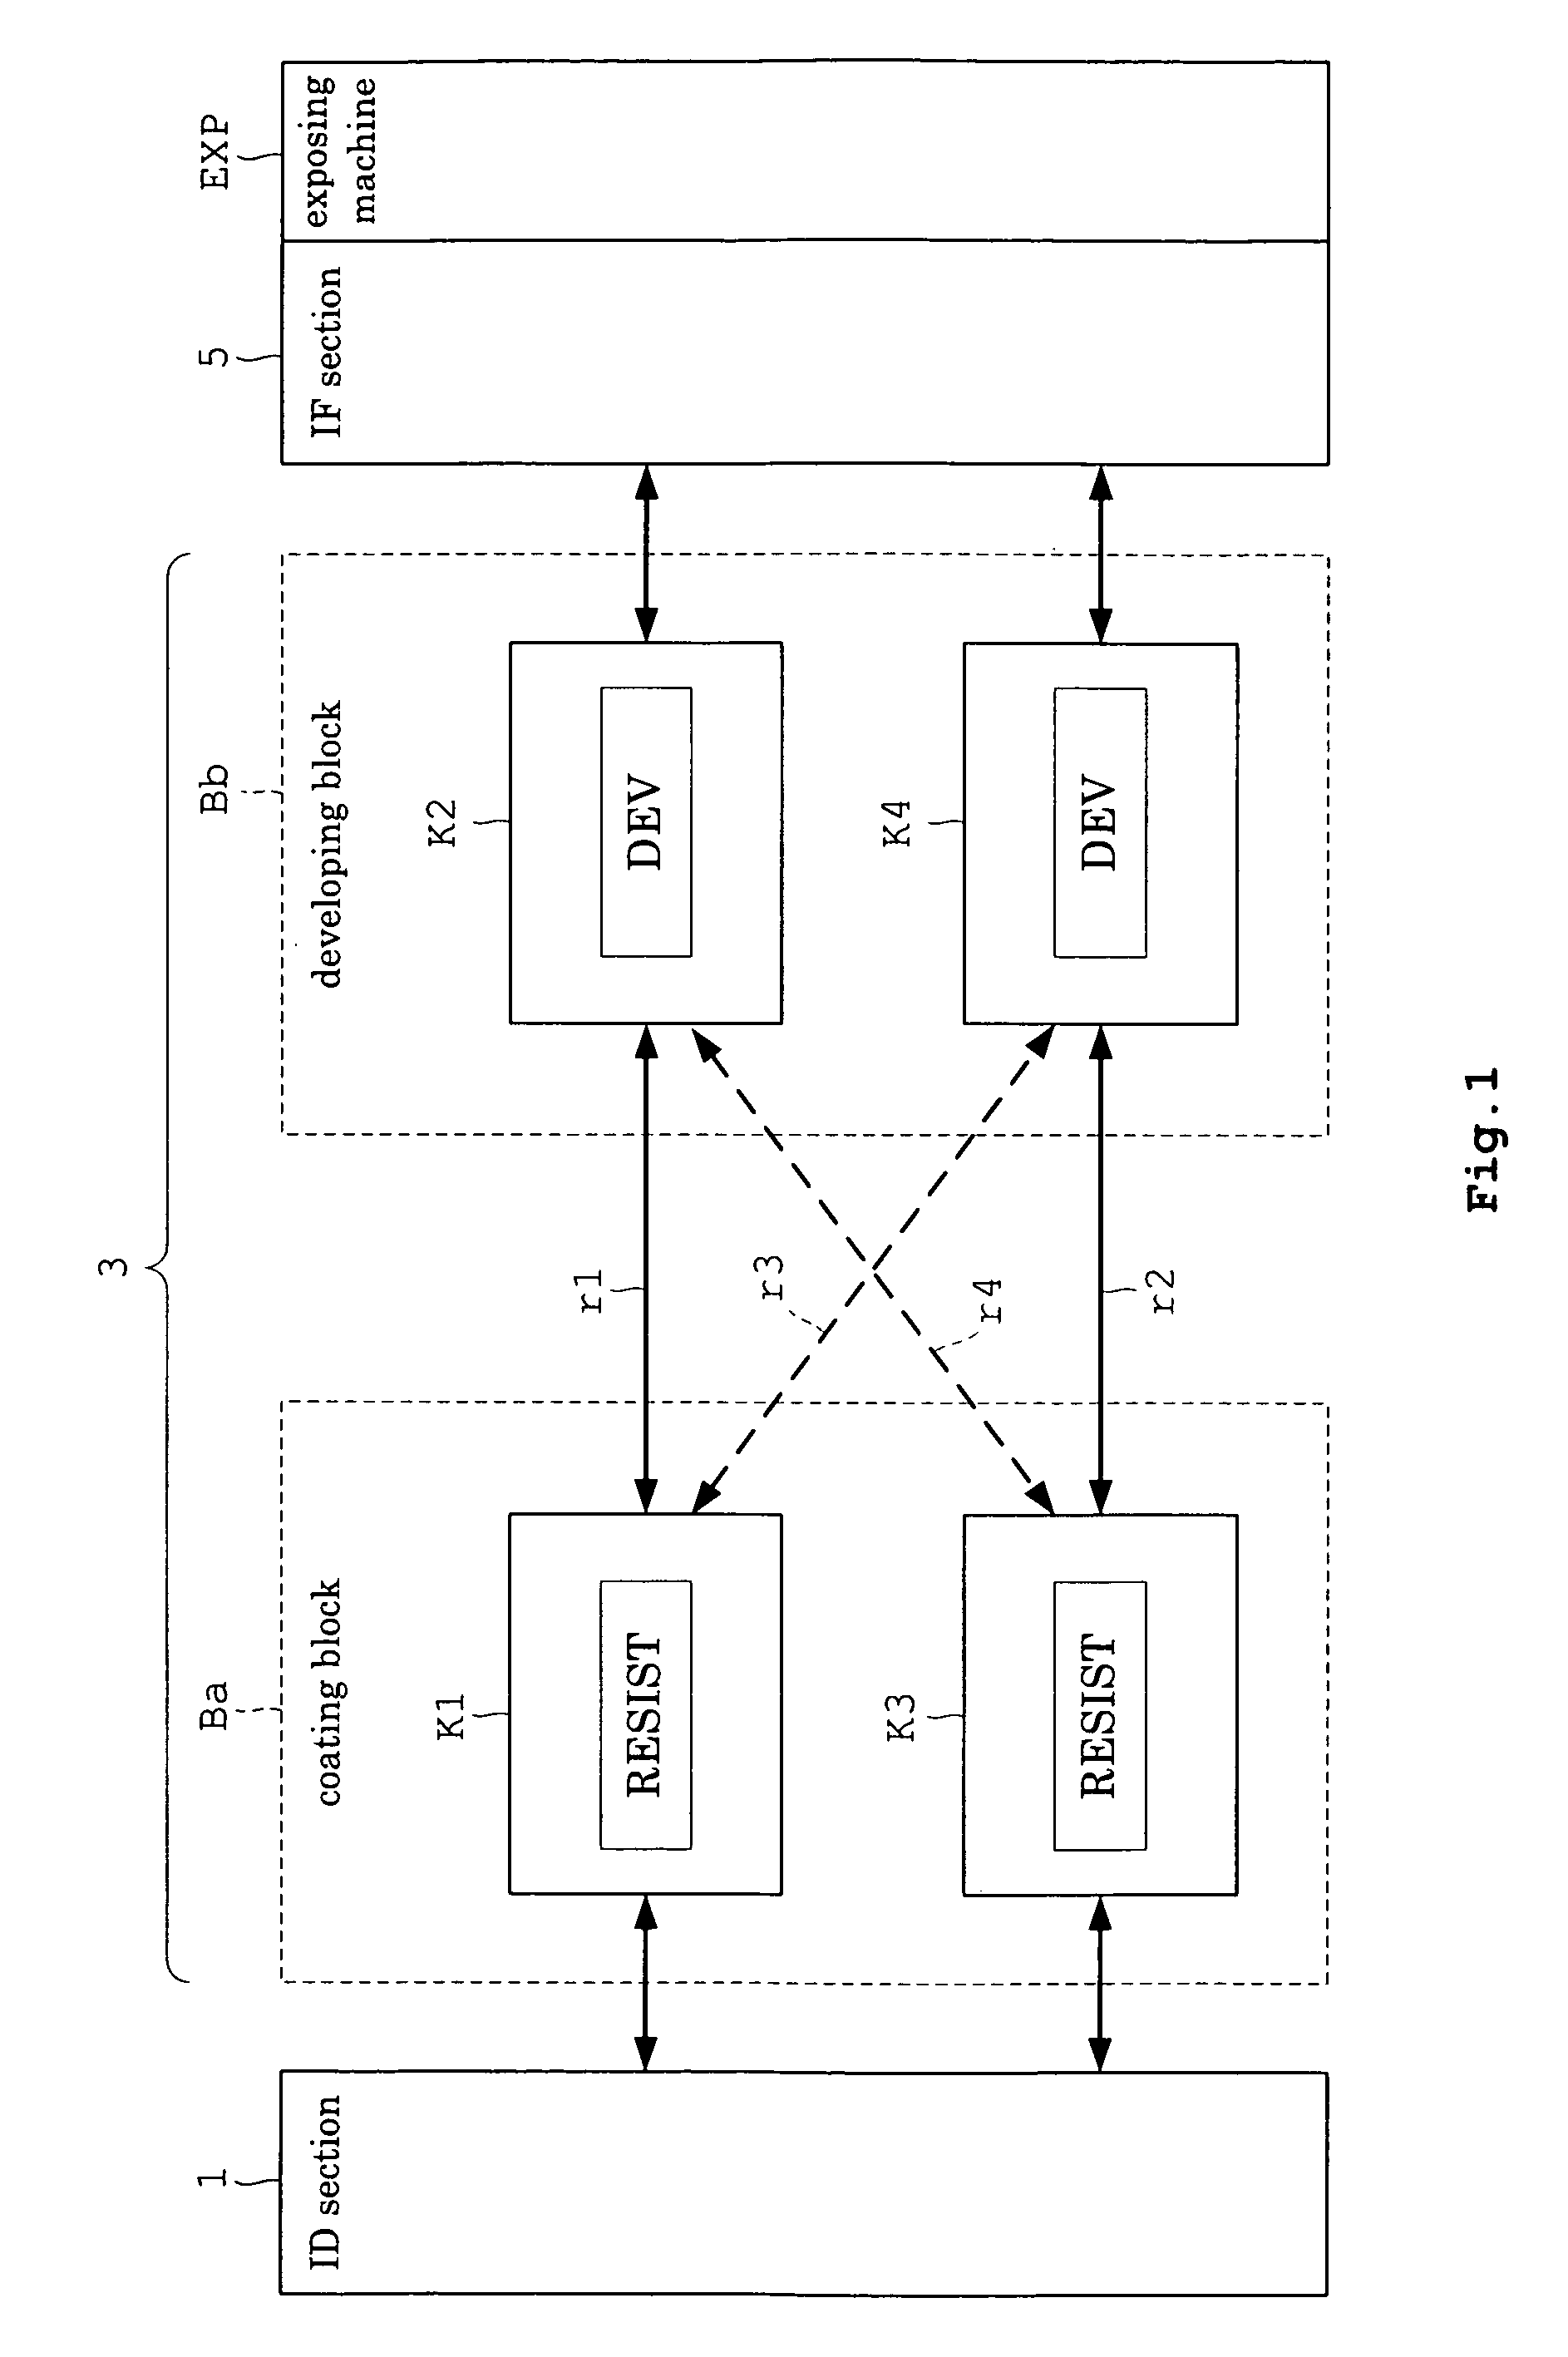 Multi-story substrate treating apparatus with flexible transport mechanisms and vertically divided treating units